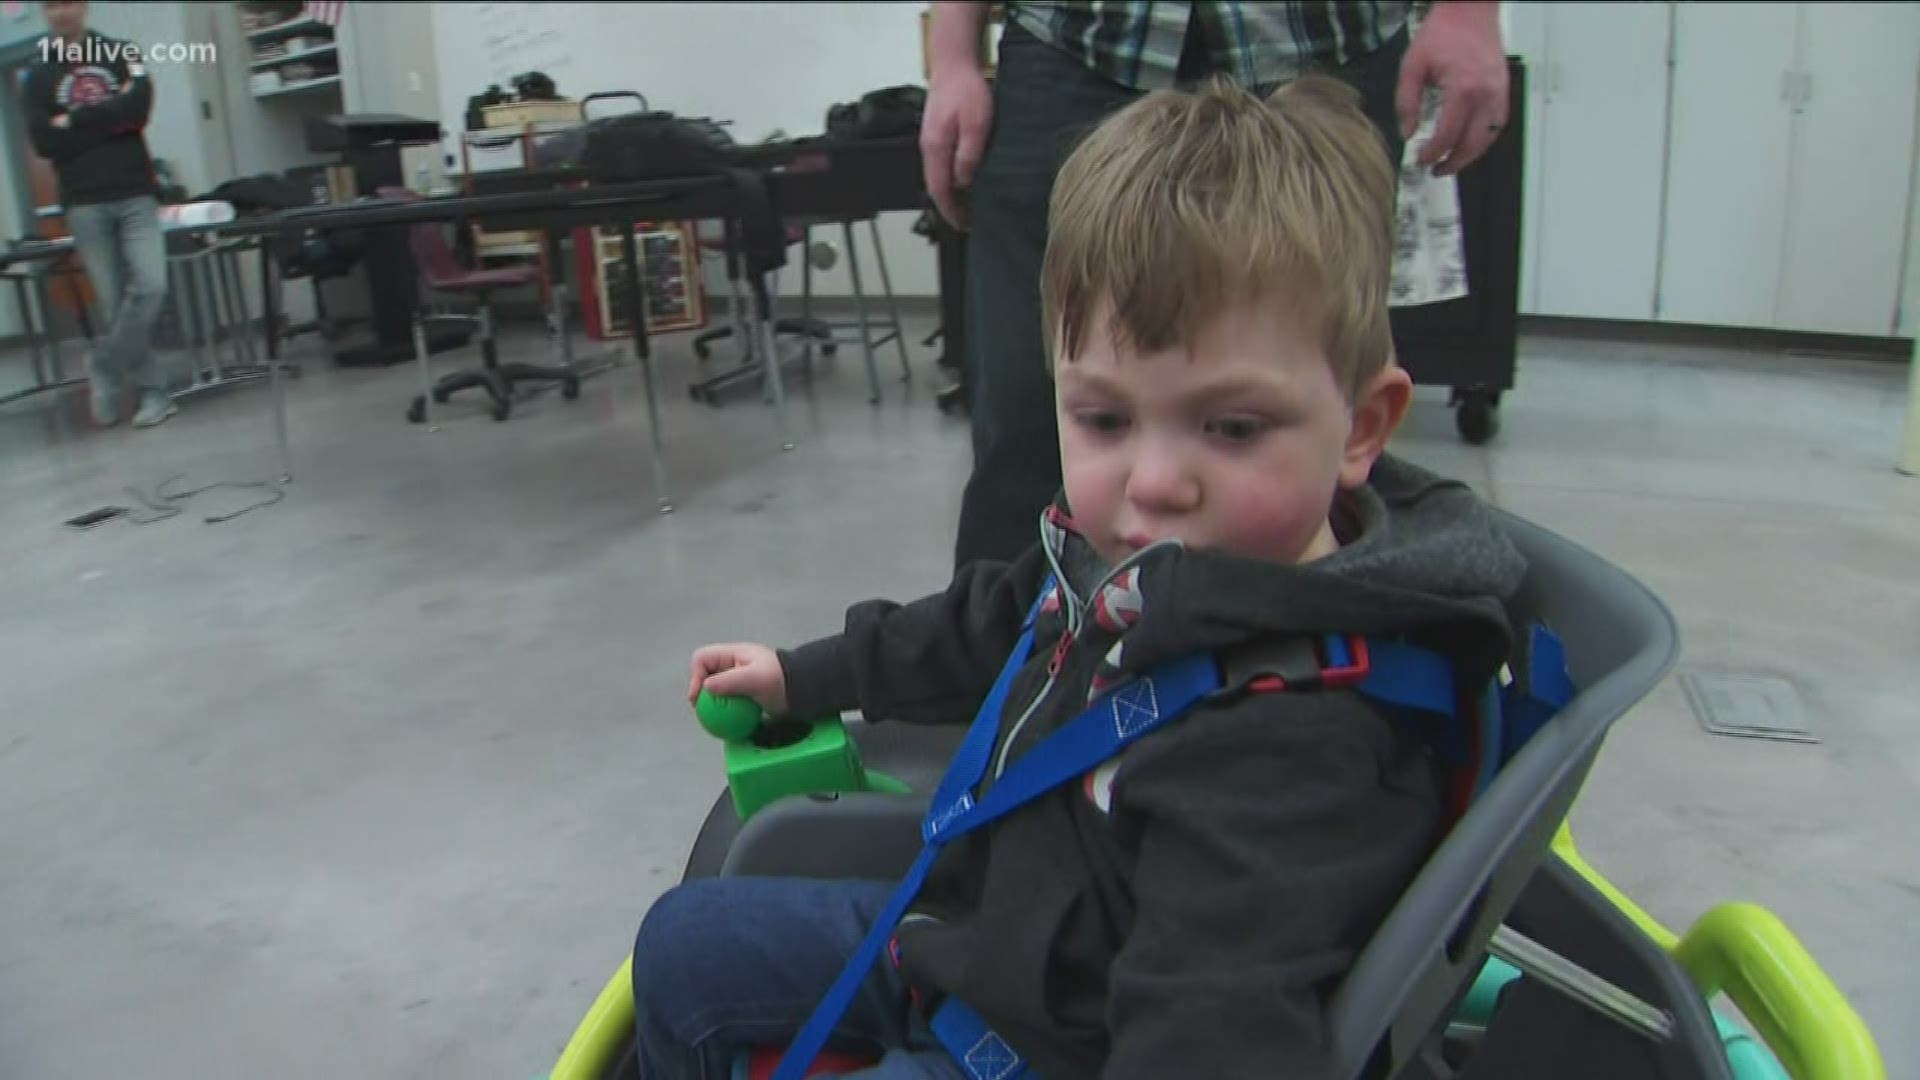 Thanks to the robotics team at Farmington High School, Cillian now has his ride – a functioning power wheelchair hand-built from a Power Wheels riding toy.